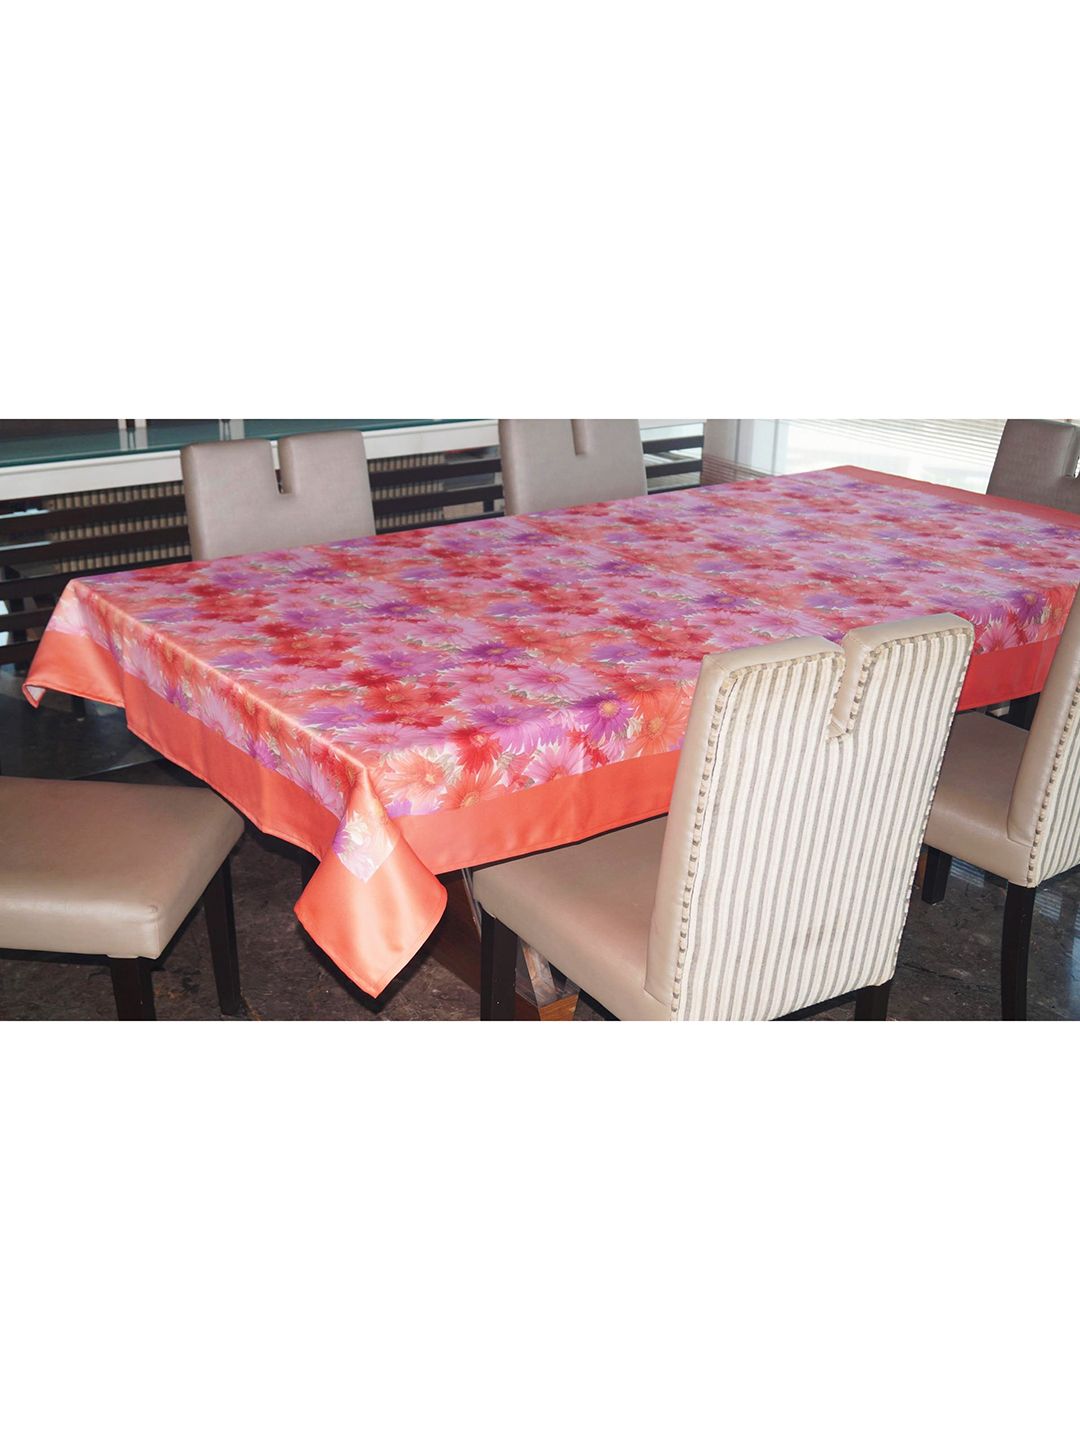 Lushomes Peach-Coloured & Pink Digital Printed 6-Seater Table Cloth Price in India